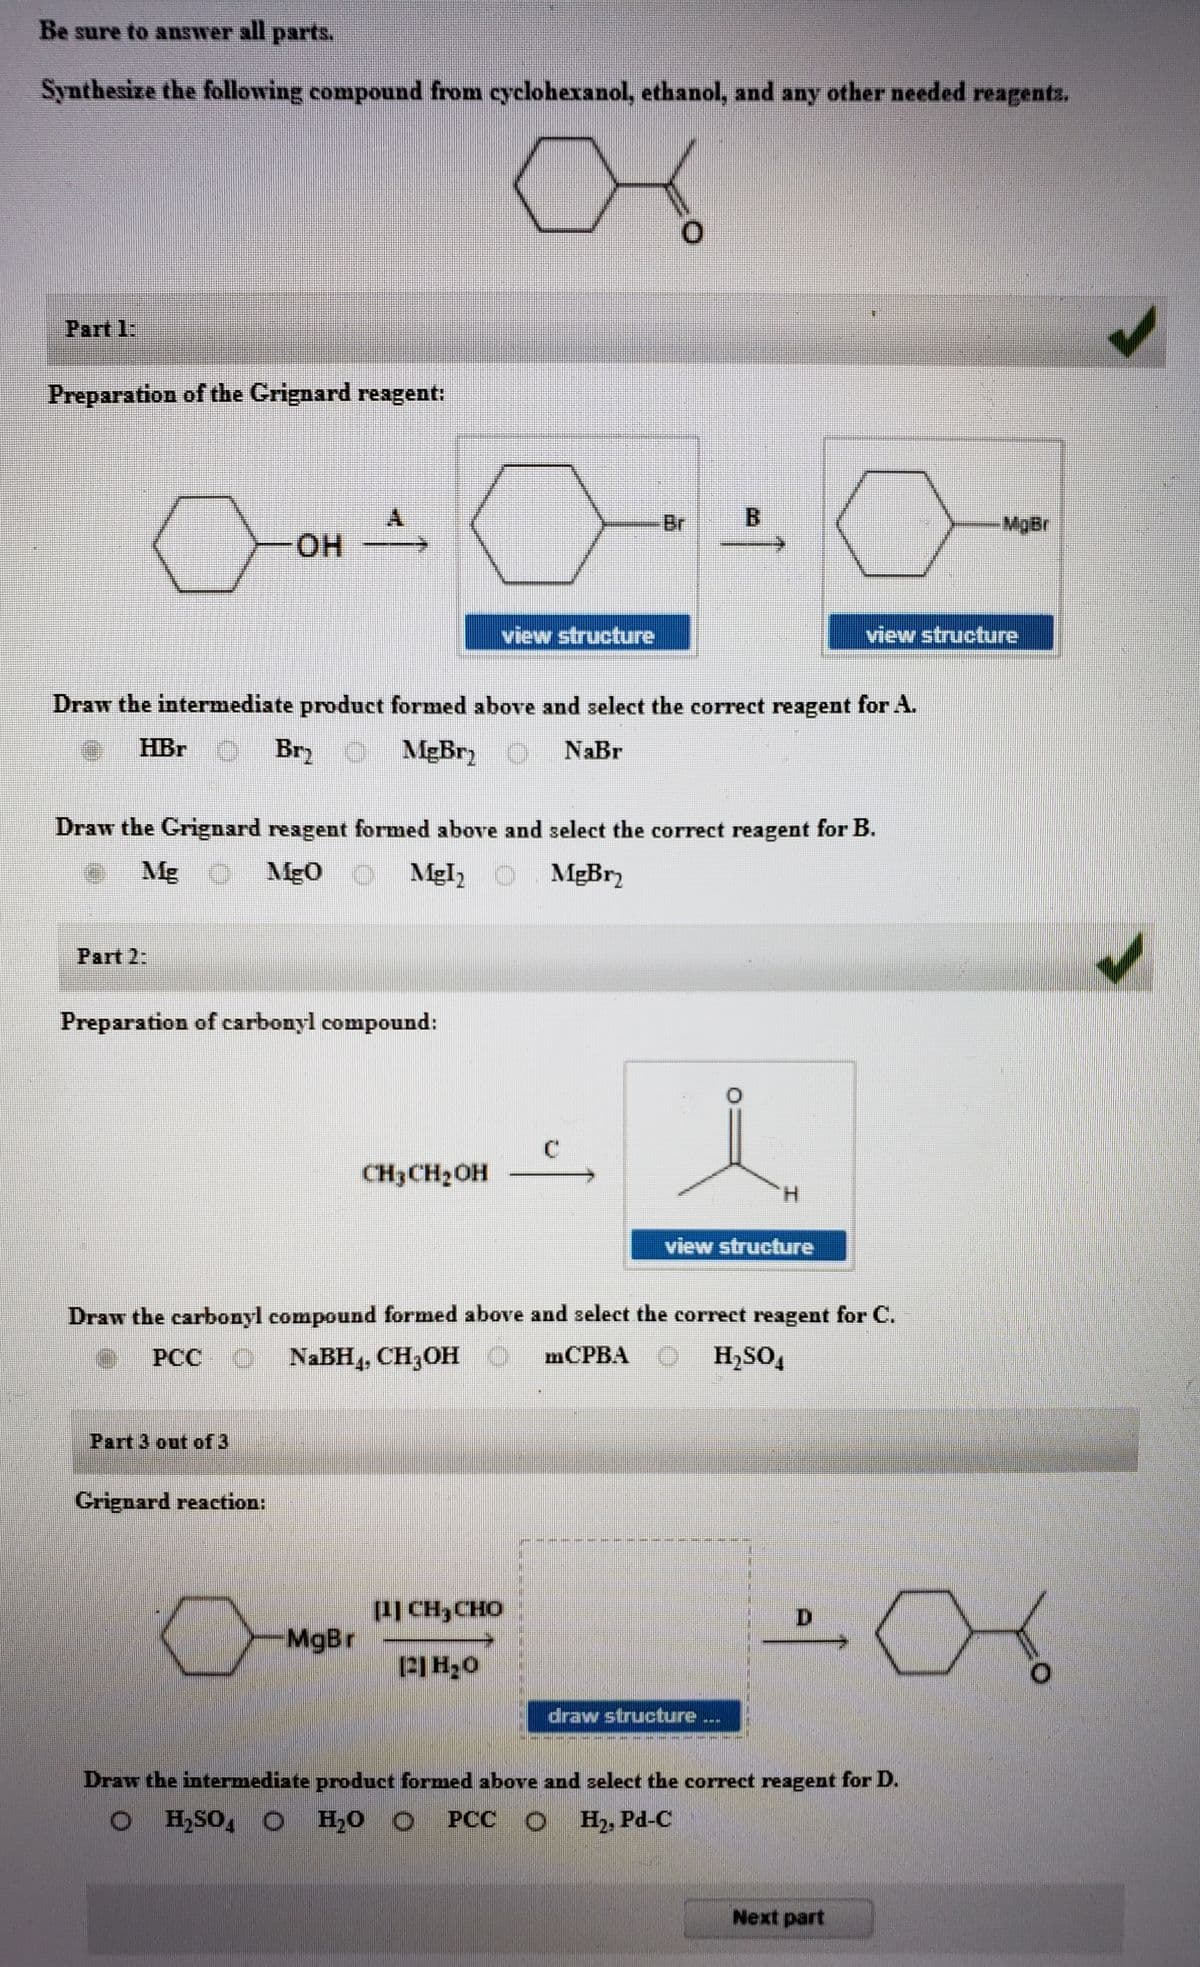 Be sure to answer all parts.
Synthesize the following compound from cyclohexanol, ethanol, and any other needed reagents.
Part 1:
Preparation of the Crignard reagent:
A.
Br
MgBr
он
view structure
view structure
Draw the intermediate product formed above and select the correct reagent for A.
HBr
BryO
MgBr)
NaBr
Draw the Grignard reagent formed above and select the correct reagent for B.
Mg O Mg 0 O Mgl,O
MgBr2
Part 2:
Preparation of carbonyl compound:
CH3CH2OH
H.
view structure
Draw the carbonyl compound formed above and select the correct reagent for C.
PCC O
NABH,, CH,OH O
mCPBA
H,SO,
Part 3 out of 3
Grignard reaction:
1Ị CH3CHO
MgBr
D.
draw structure
林
Draw the intermediate product formed above and select the correct reagent for D.
H,SO, O
H,0 O
PCC
H2, Pd-C
Next part
B.
